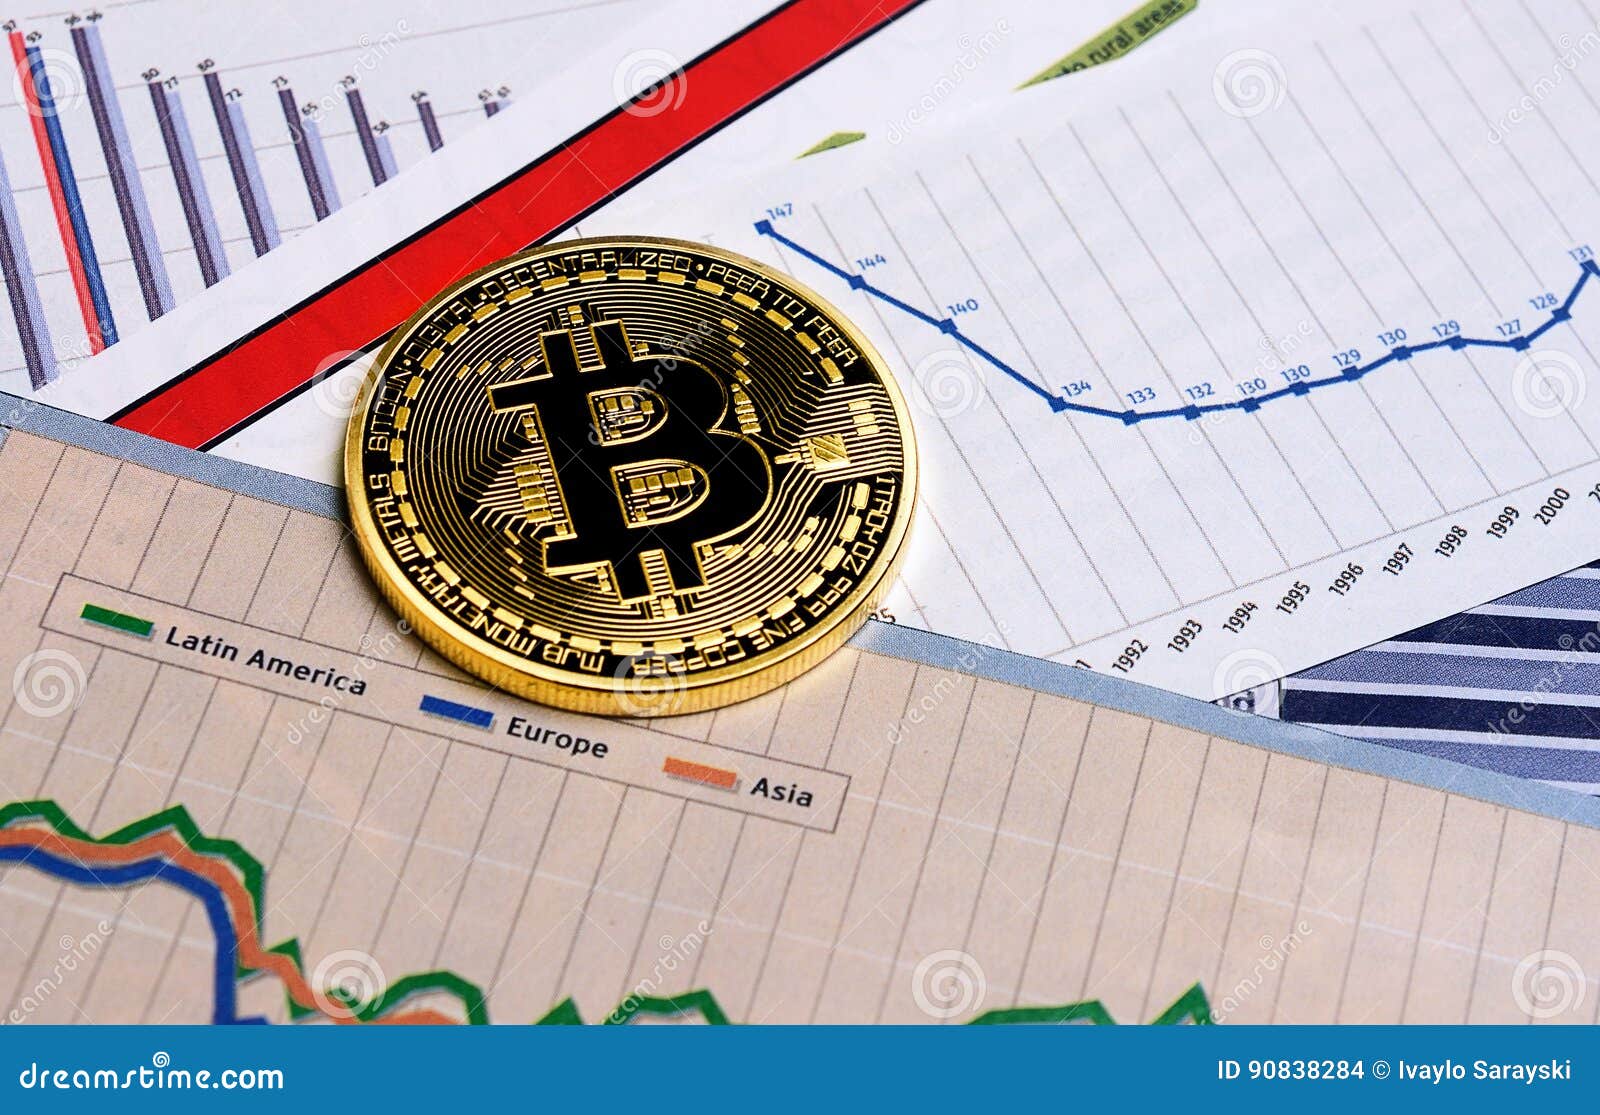 Bitcoin Crypto Currency Diagram Stock Photo - Image of ...